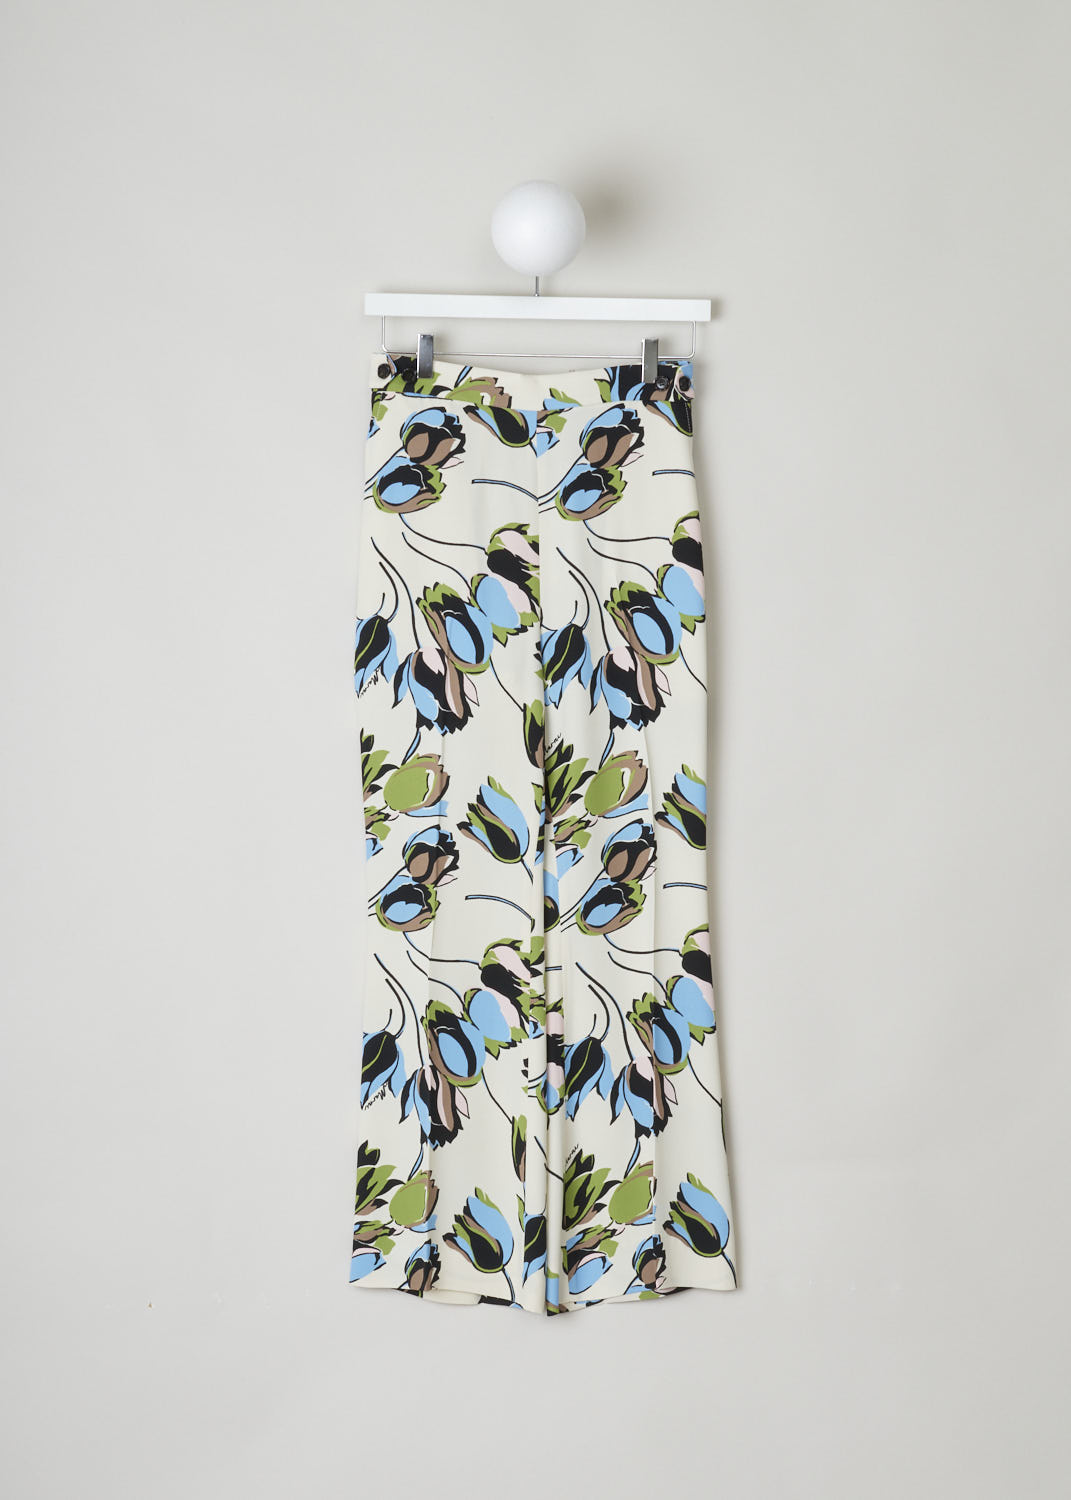 MARNI, CREME COLORED TROUSERS WITH FLORAL PRINT, PAMA0132Q0_UTV844_WIW03, Print, Front, These creme colored trousers have a floral print in shades of blues and reds. These trousers have a partly elasticated waistline, making for a comfortable fit. Also on the waistband are decorative buttons. A concealed side zipper functions as the closure option. The trousers have slanted pockets with contrasting black lining. 
